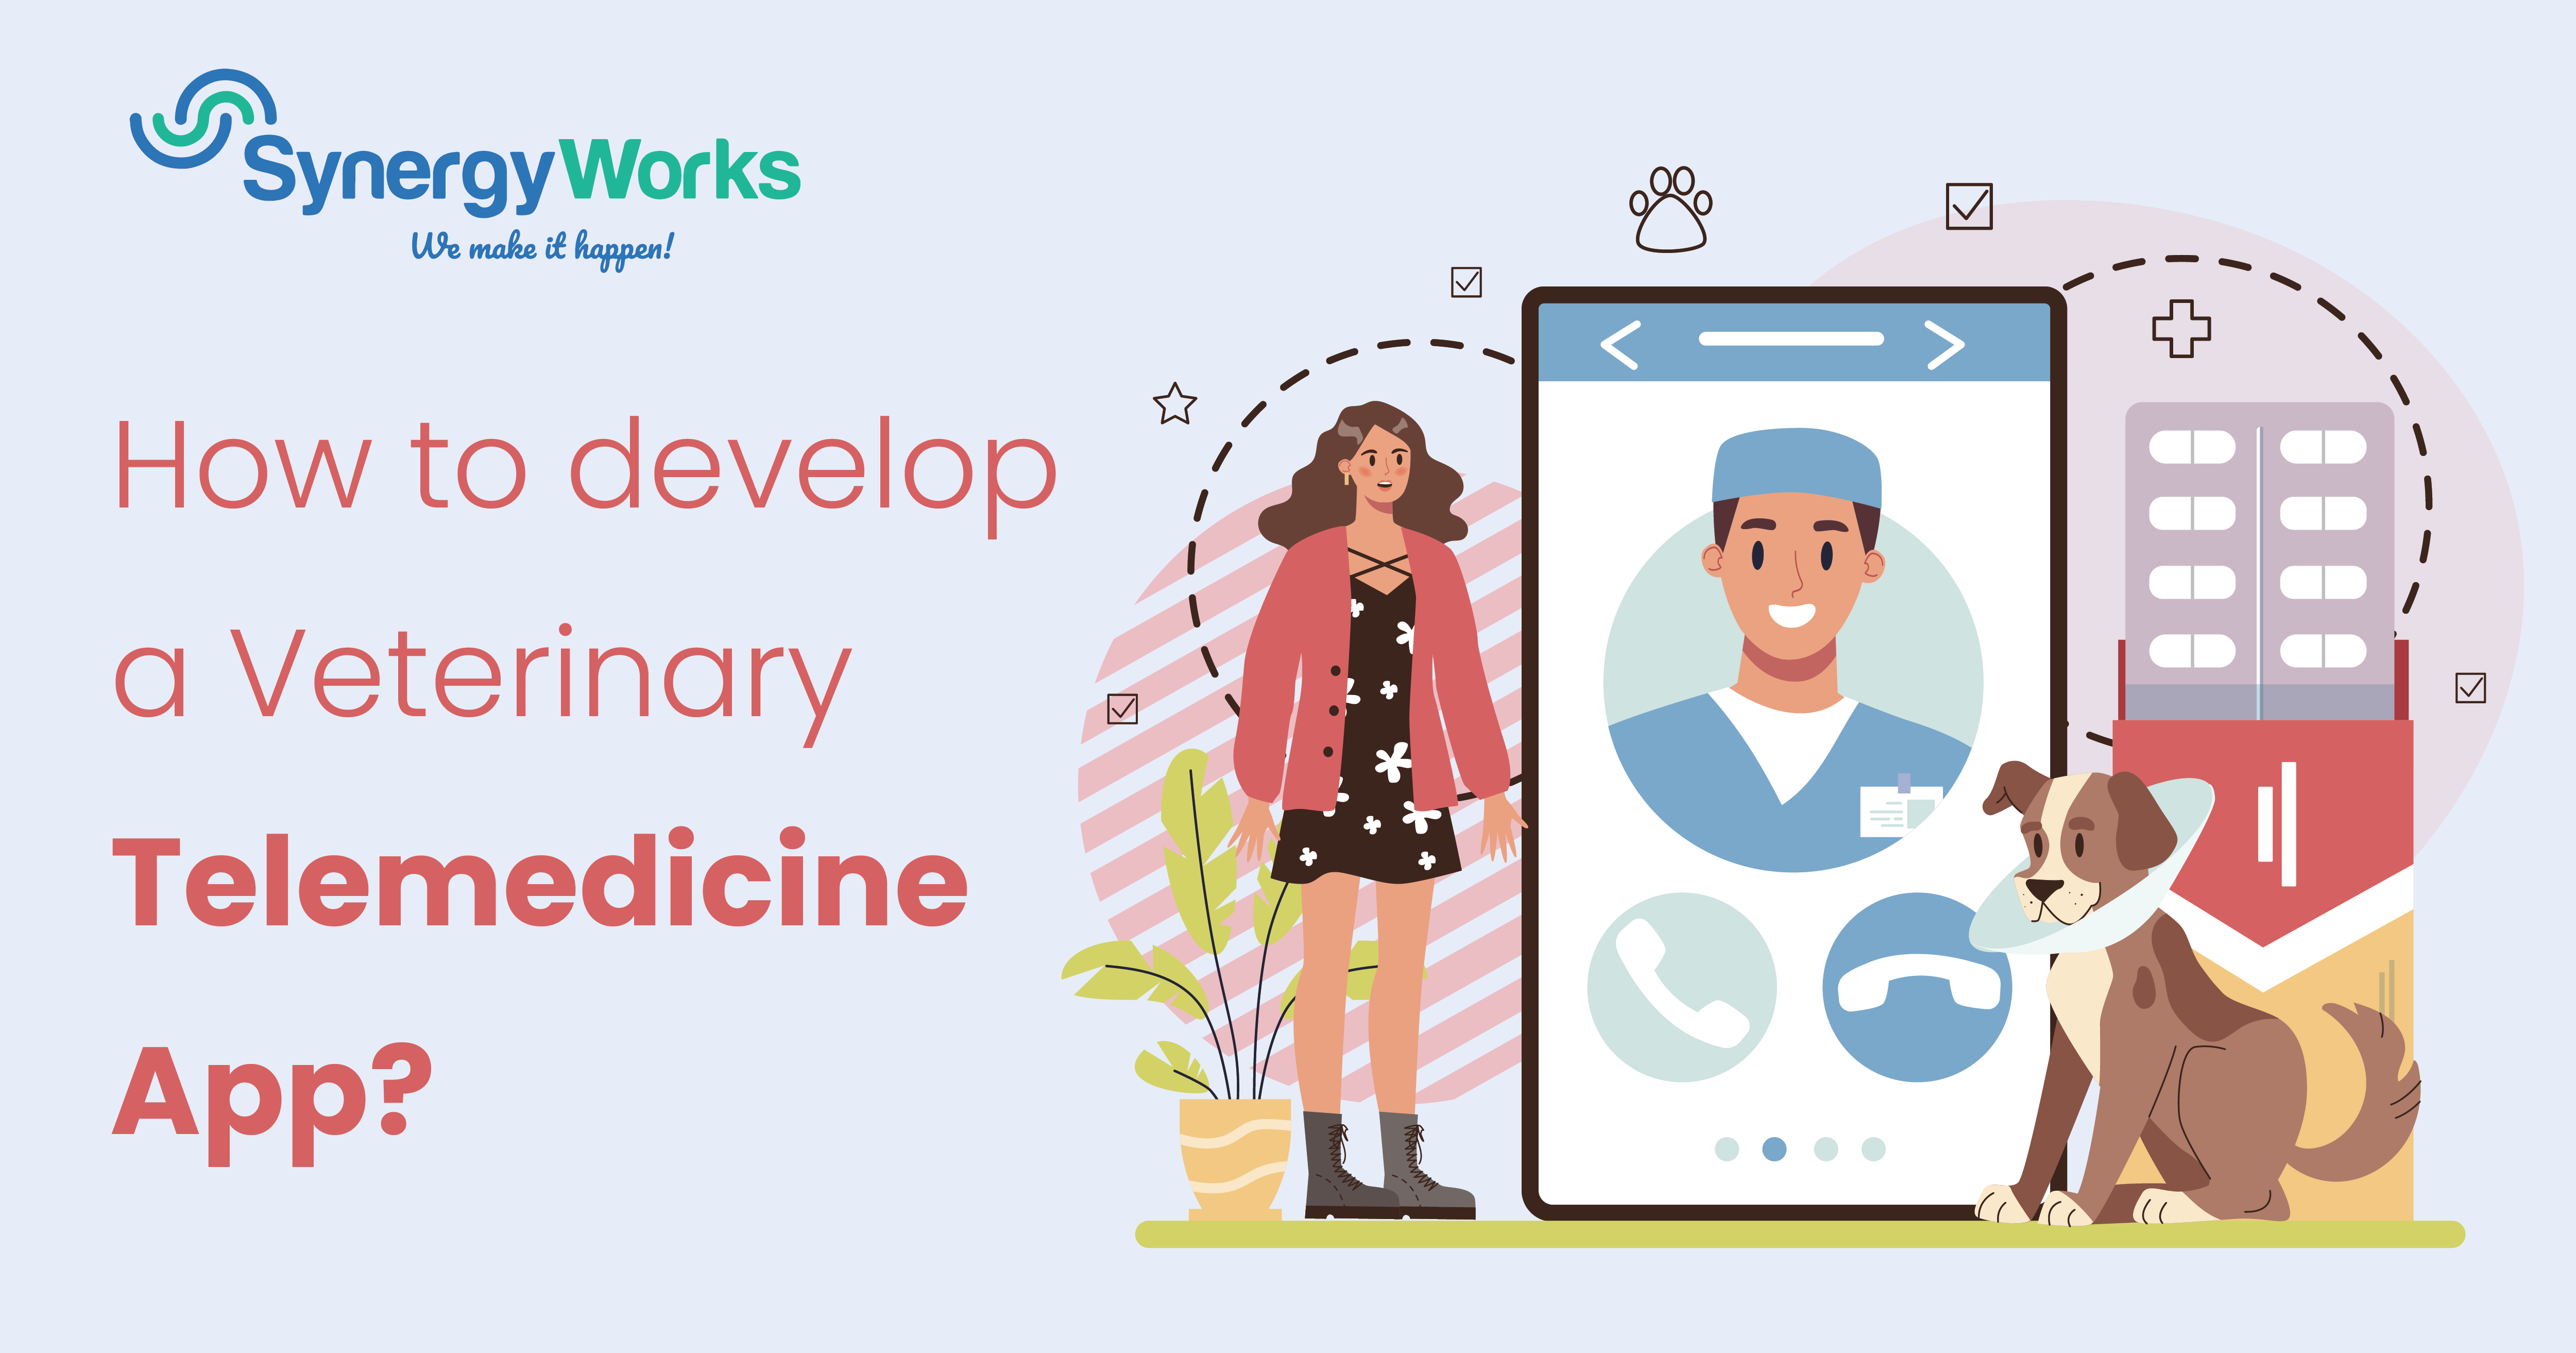 How to Develop a Veterinary Telemedicine App?